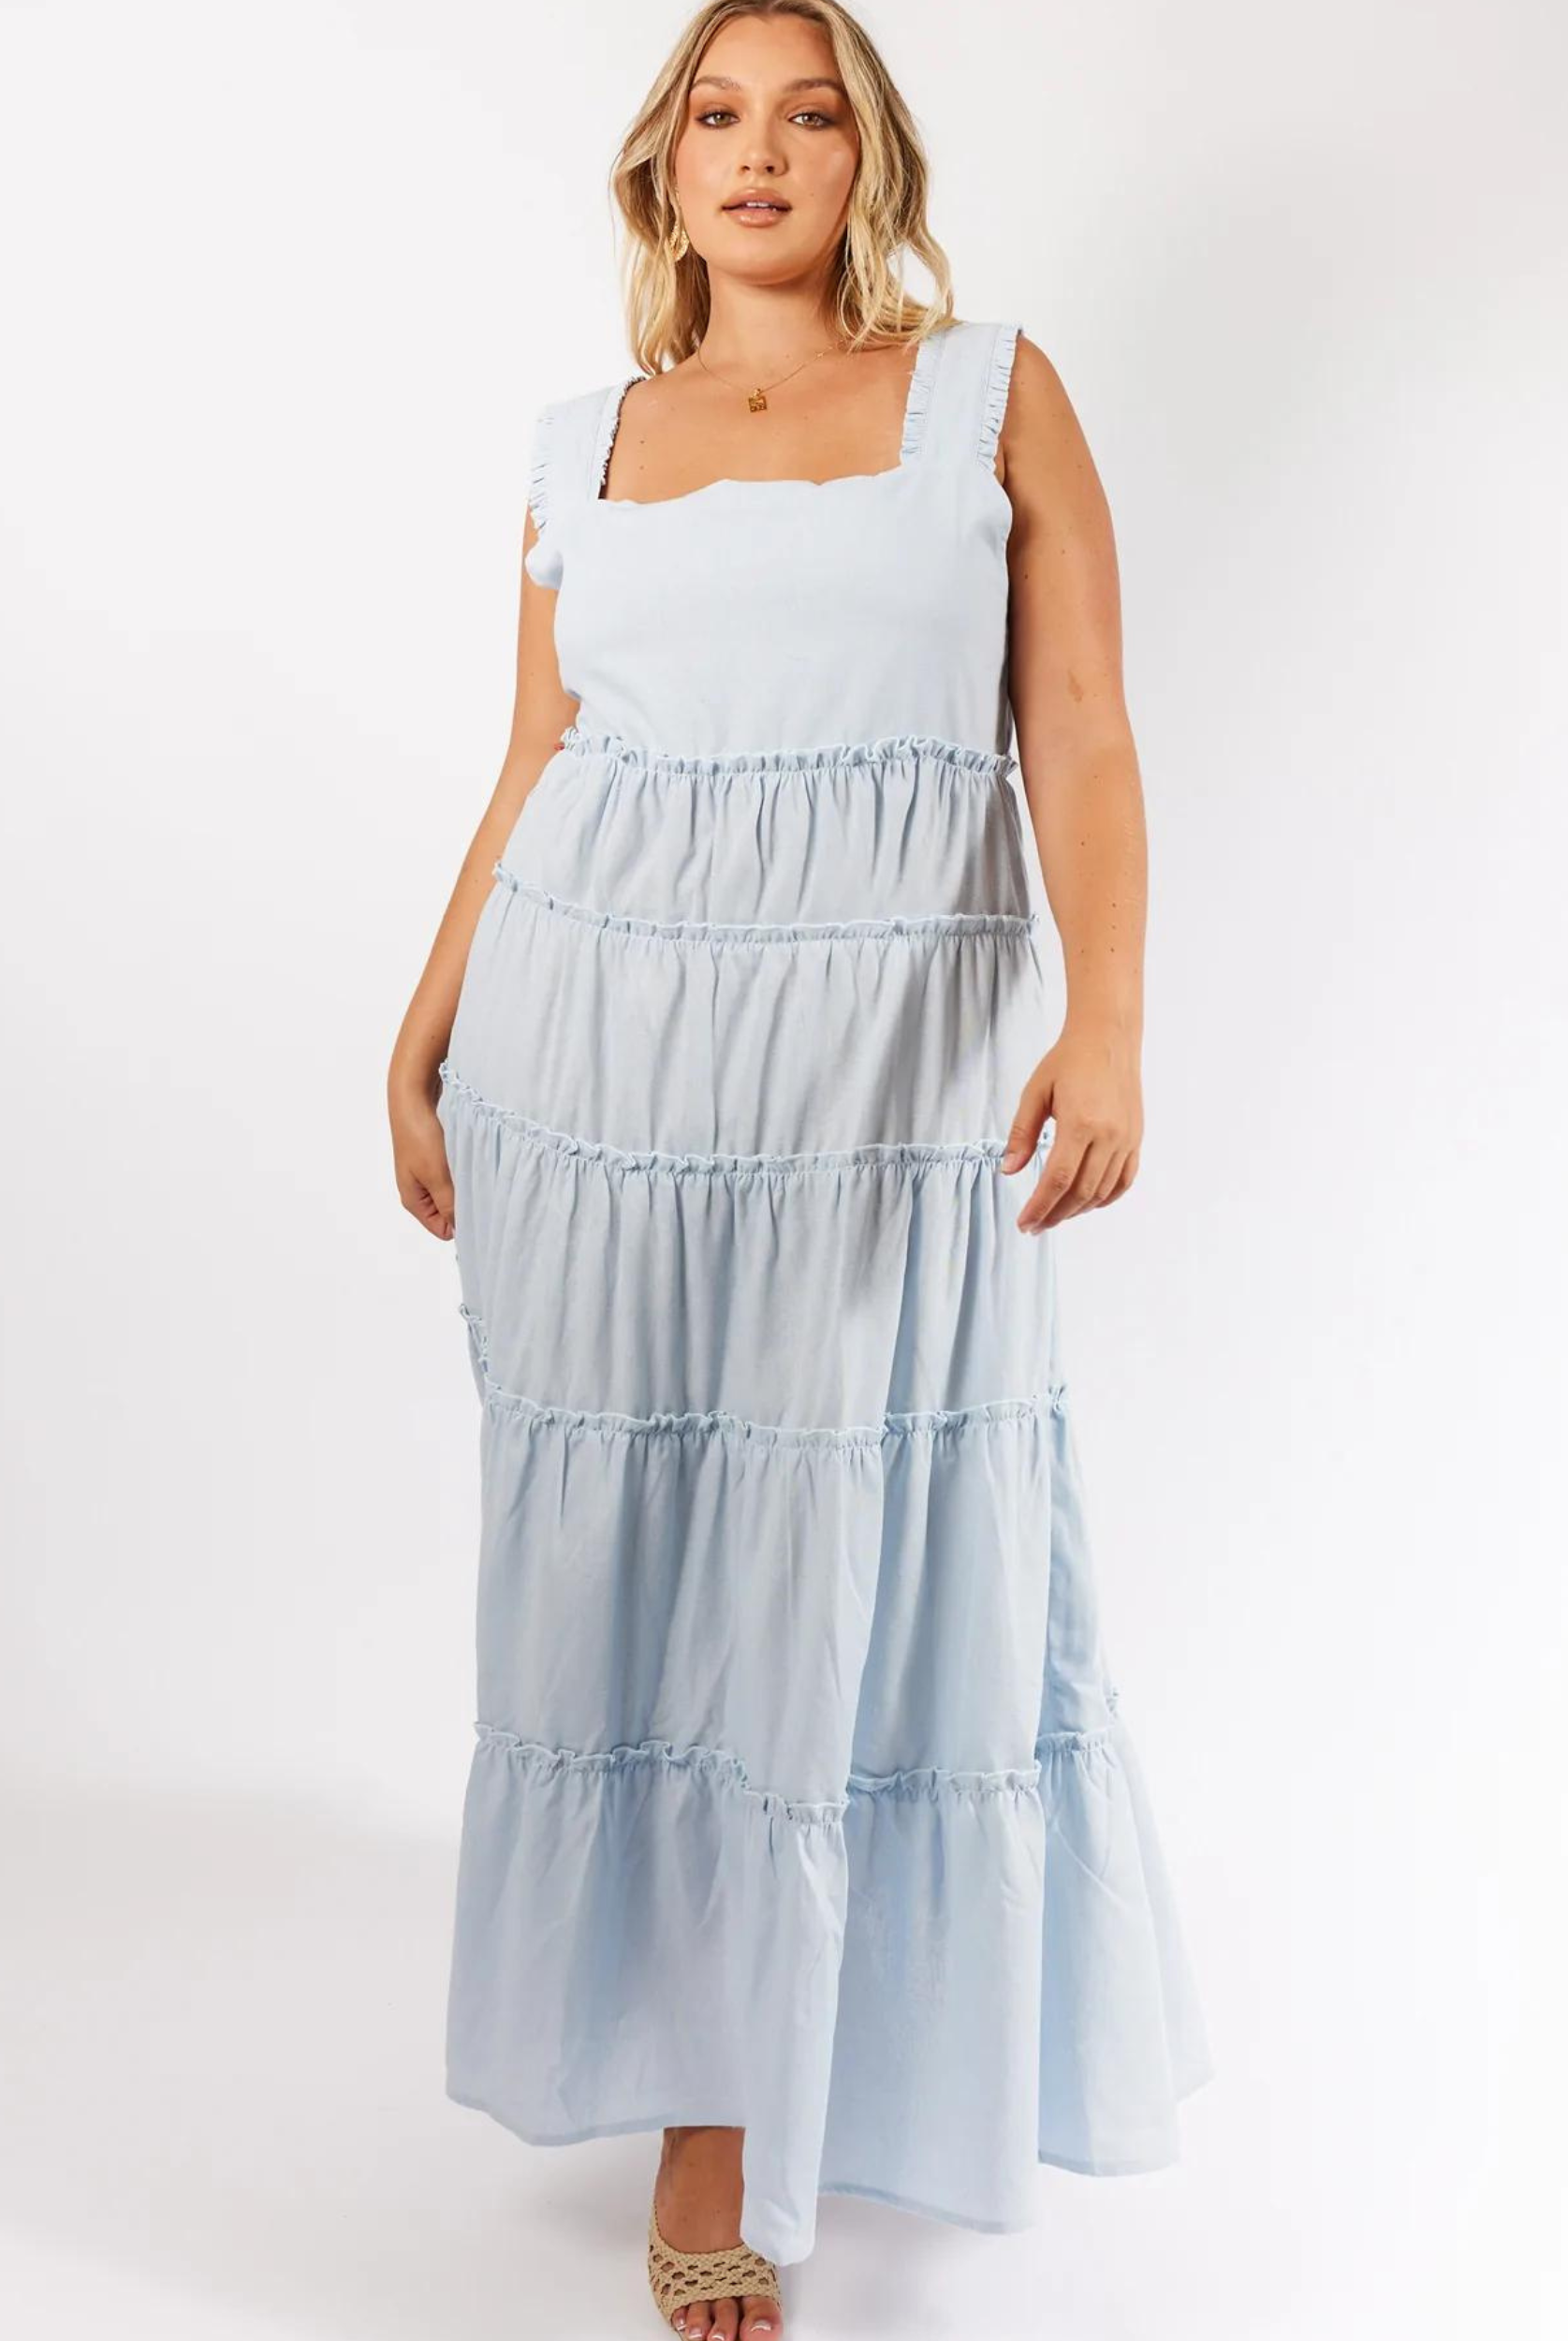 Curvy Plus Size Model wearing the pale blue emery maxi dress with thick straps and tiered a line maxi skirt